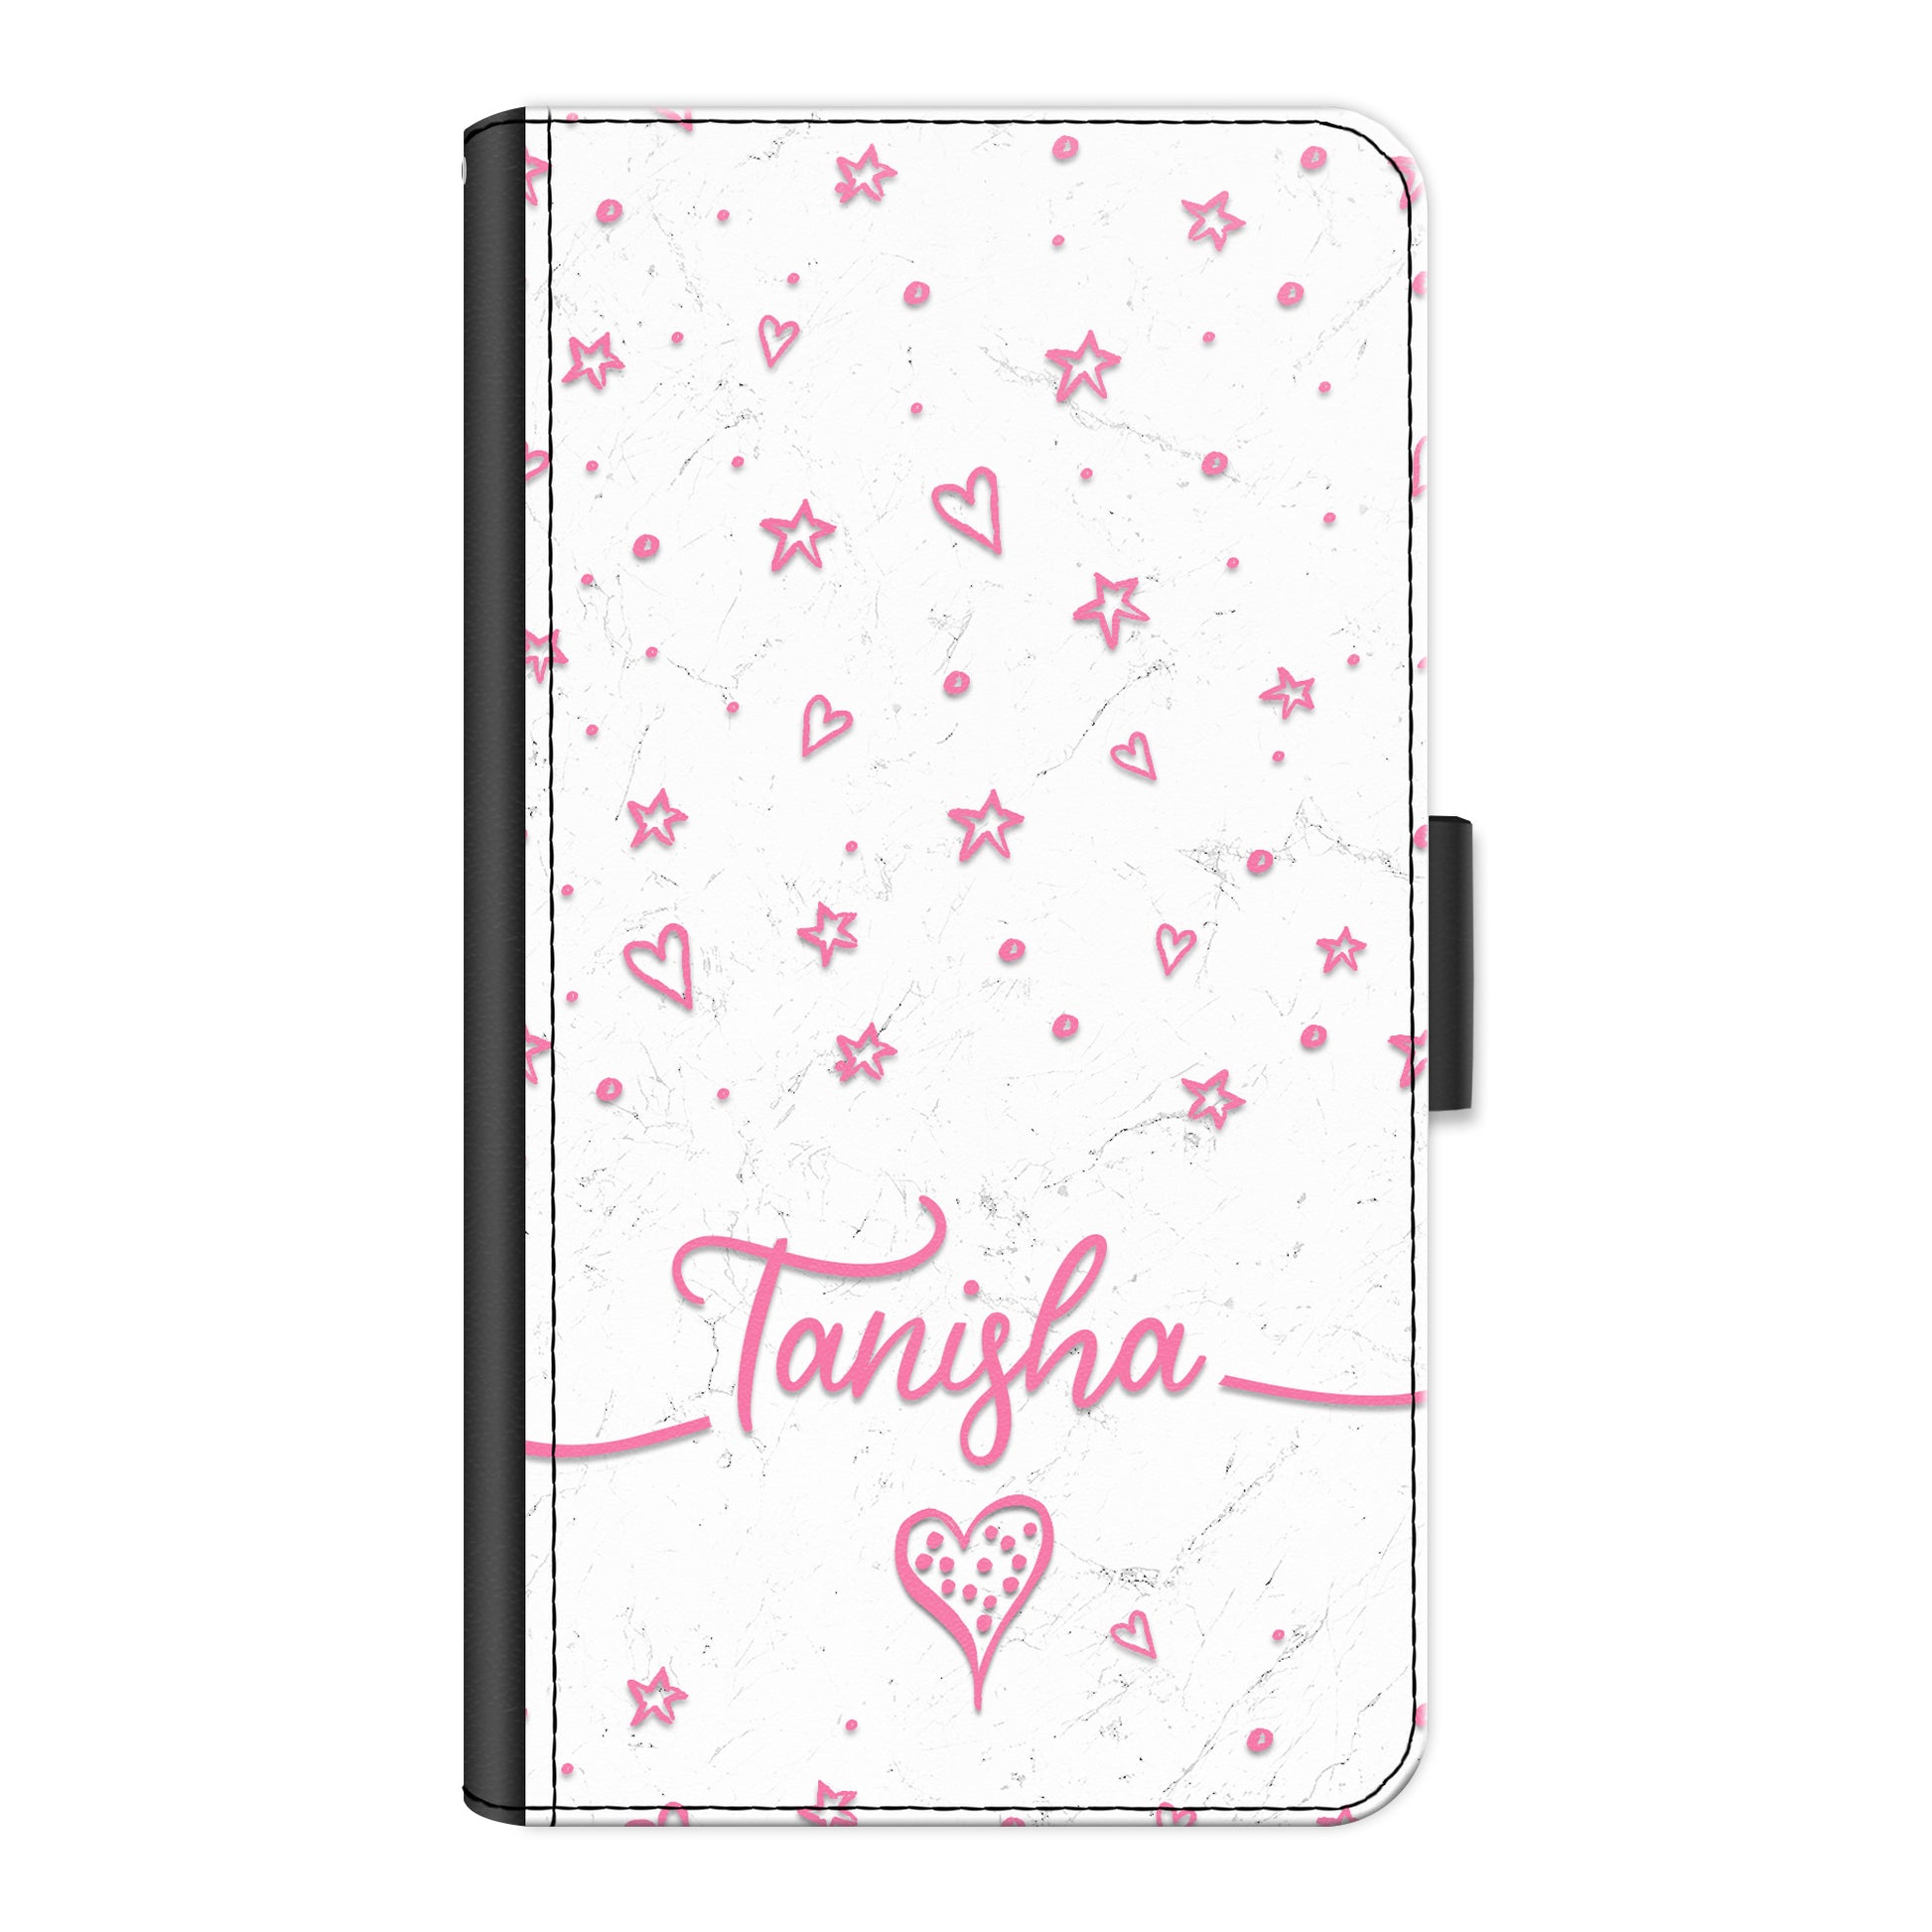 Personalised Honor Phone Leather Wallet with Pink Stylish text, Stars and Hearts on White Marble